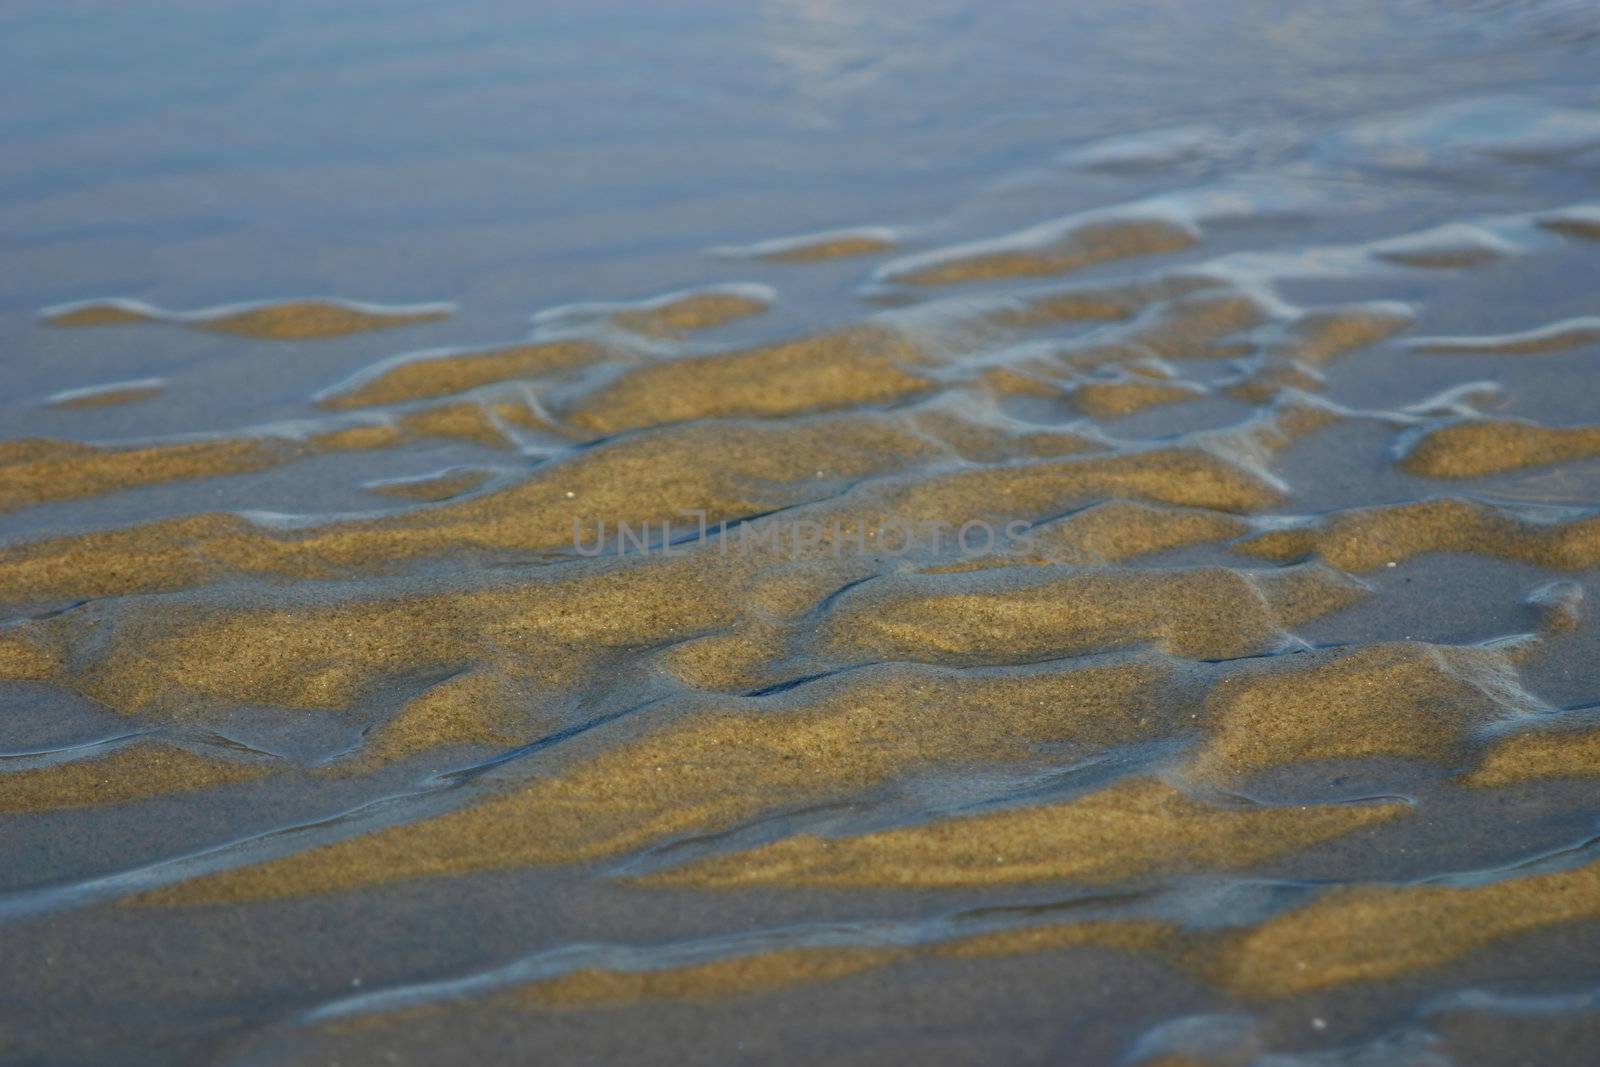 sand ripples from the waves/wind at the seashore